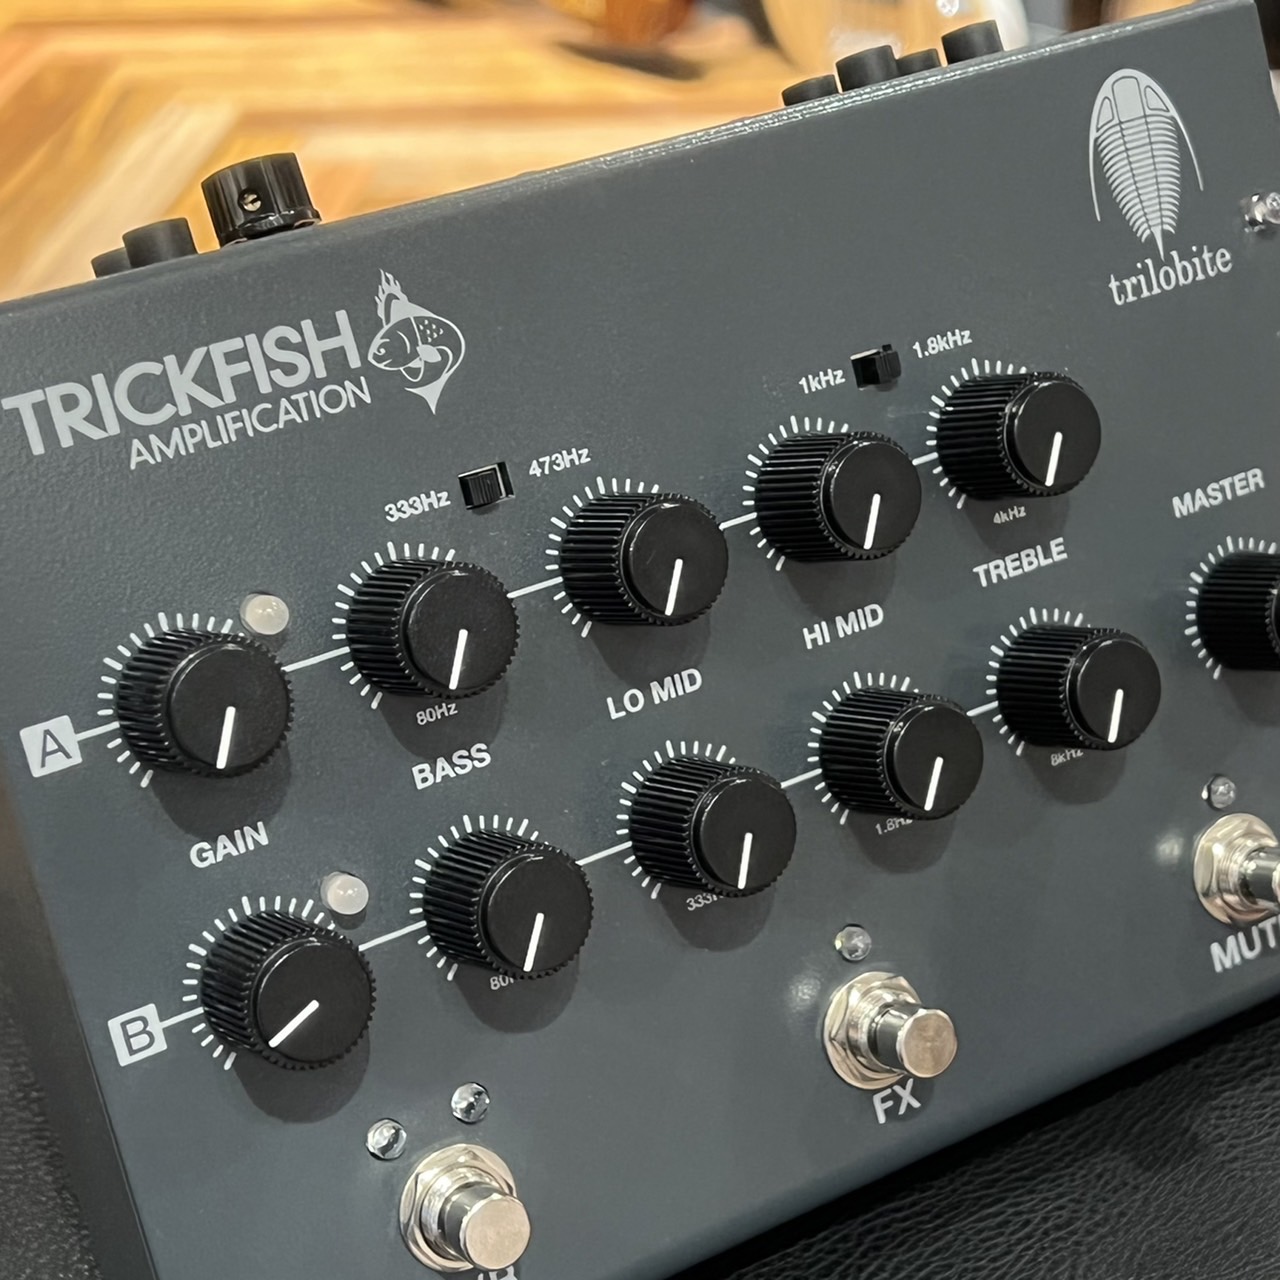 Trickfish Trilobite Dual Channel Bass Preamp トリックフィッシュ 